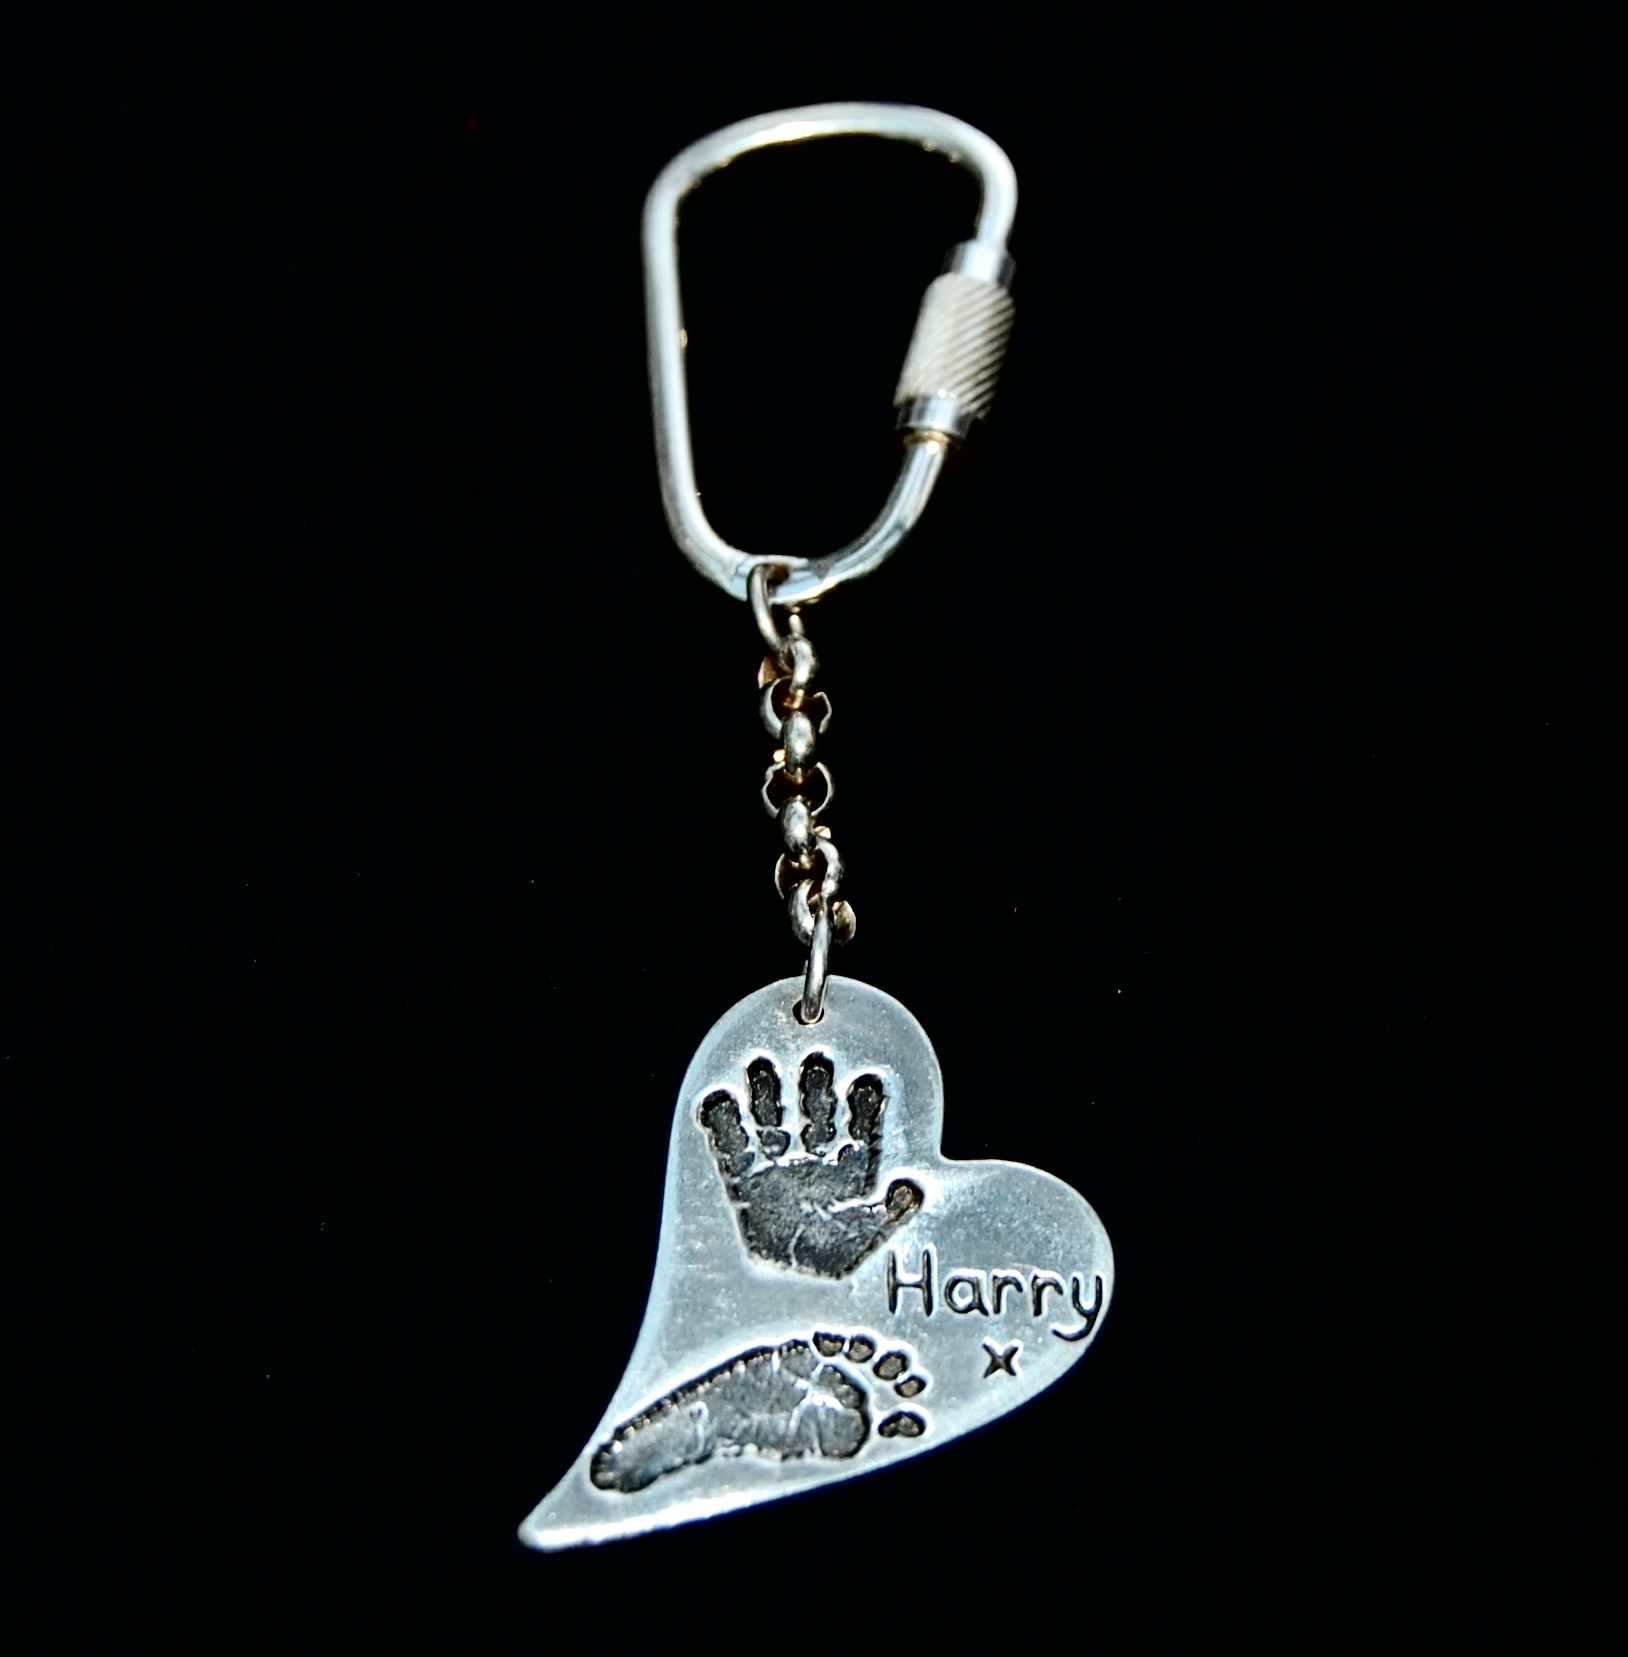 Large silver curved heart hand and footprint kering. Name hand inscribed alongside the prints.